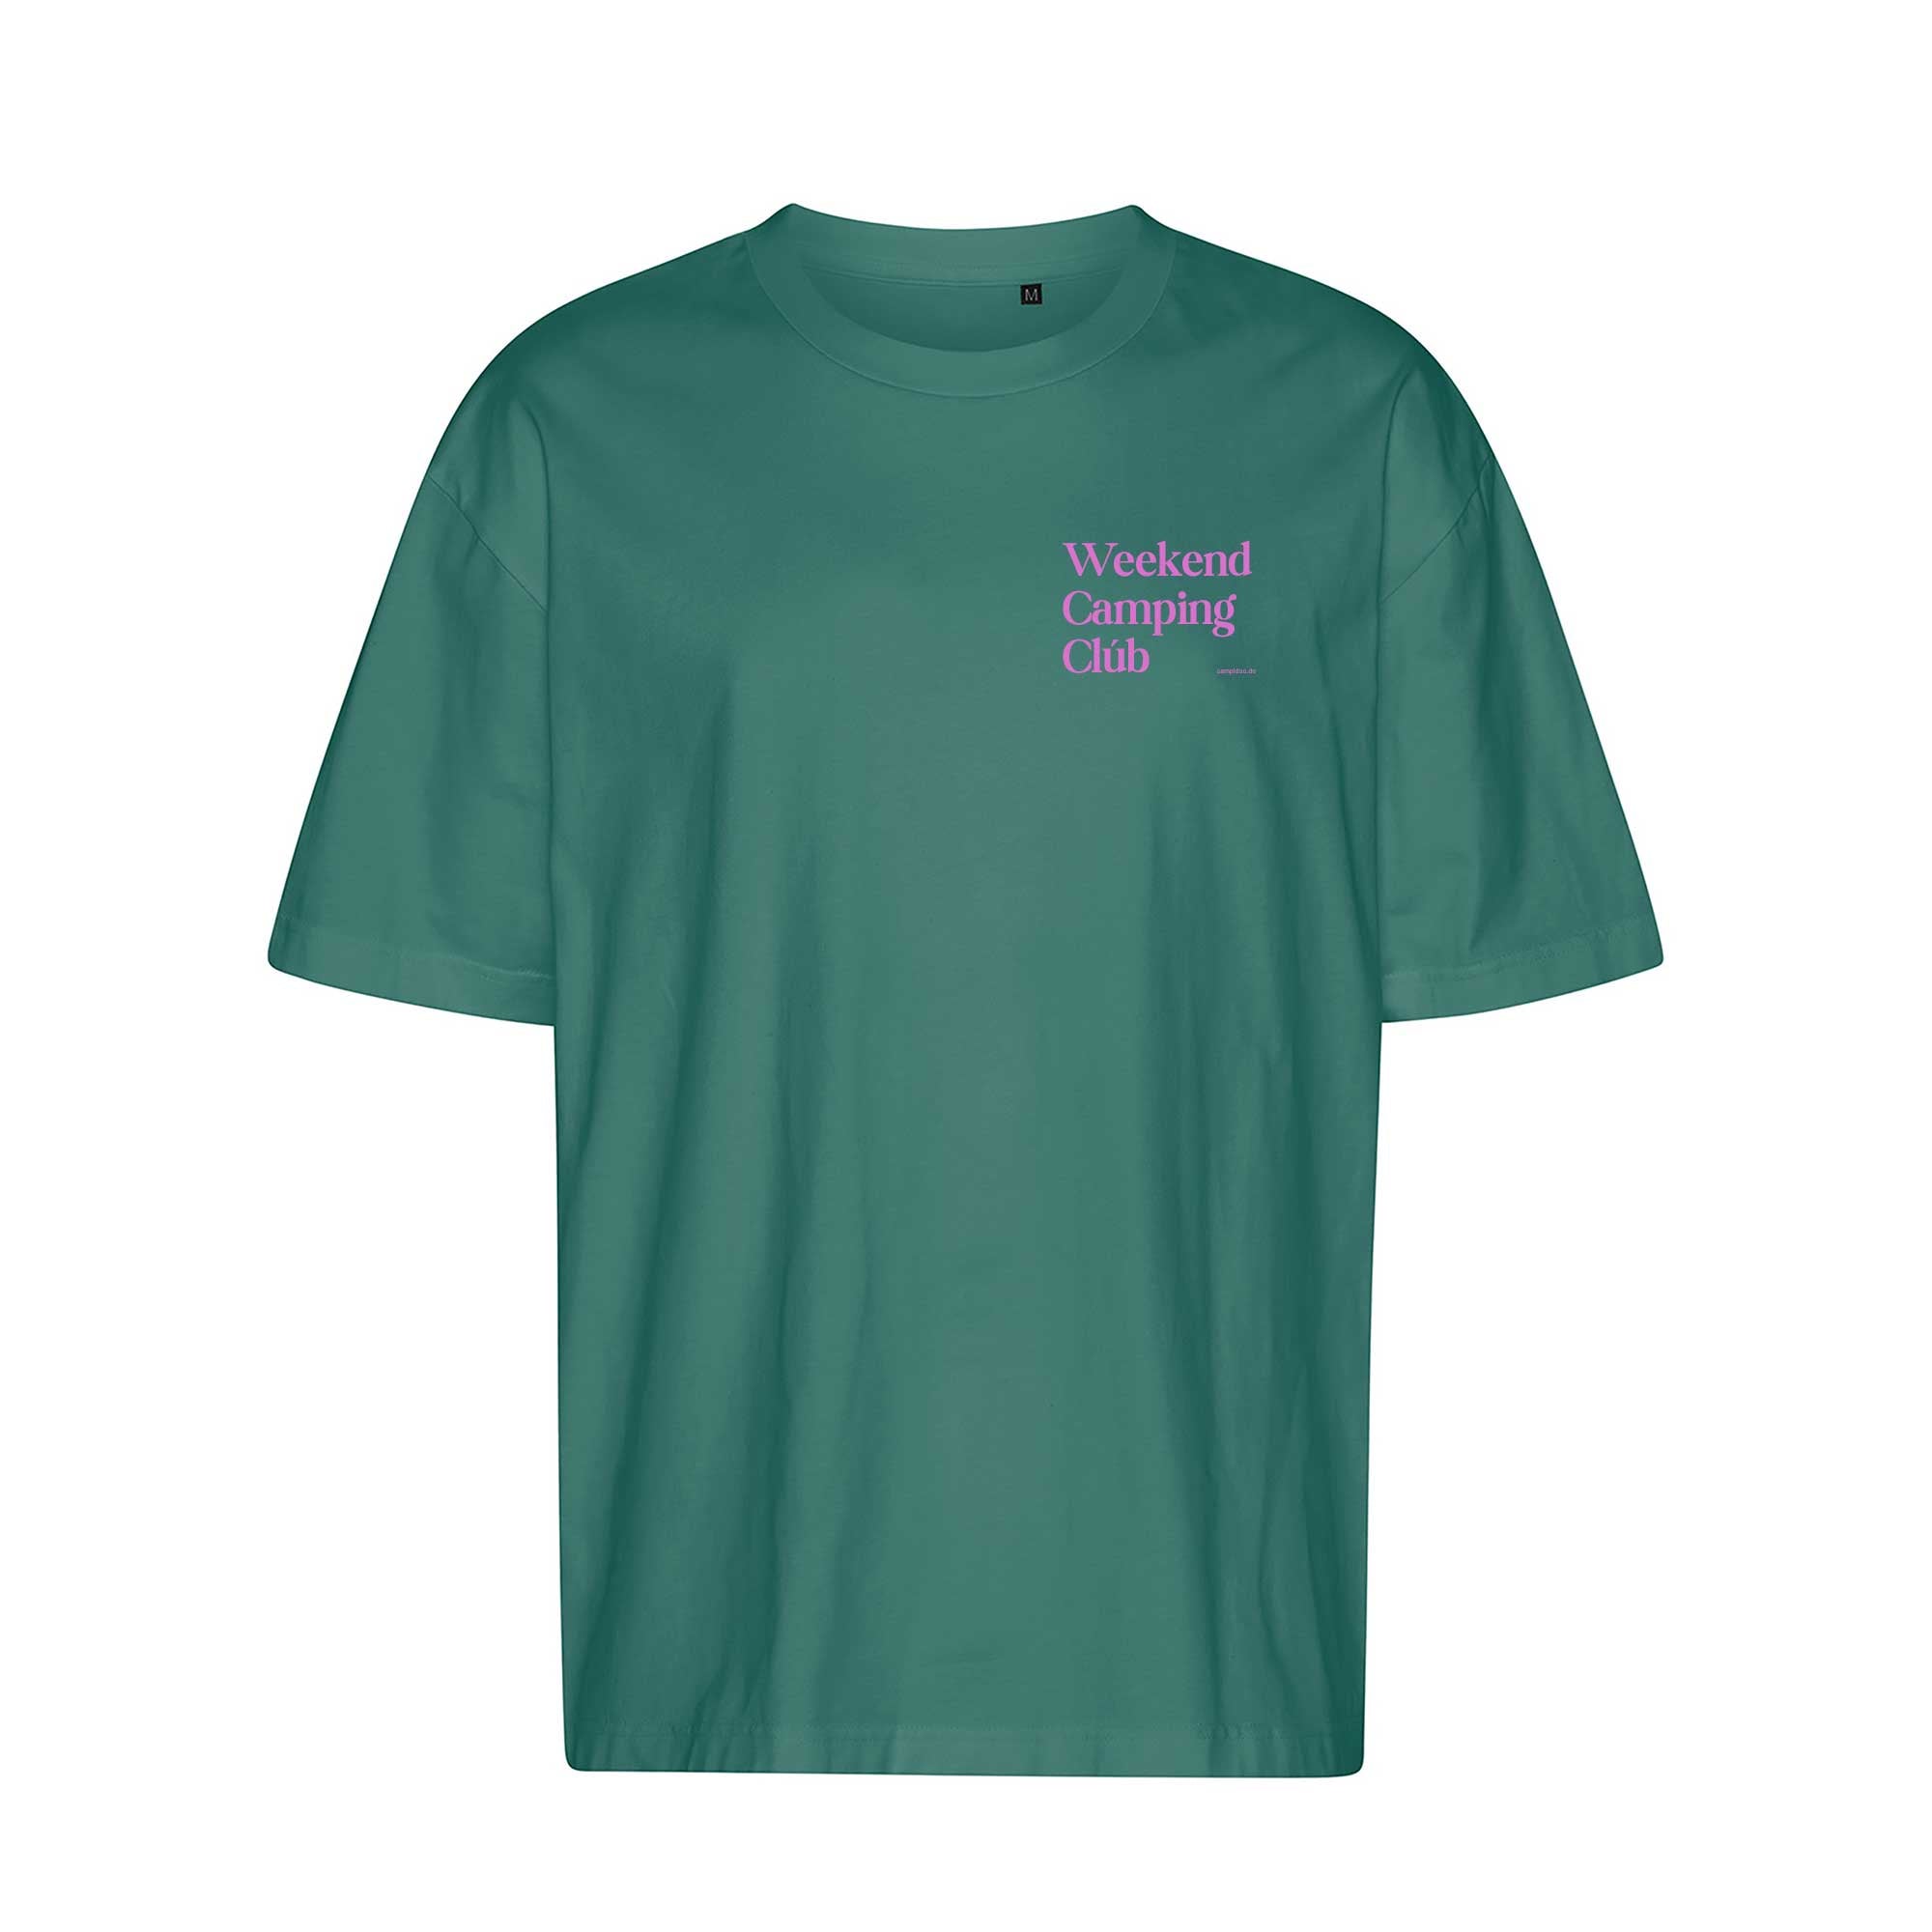 Oversized T-Shirt TEAL "Weekend Camping Club"